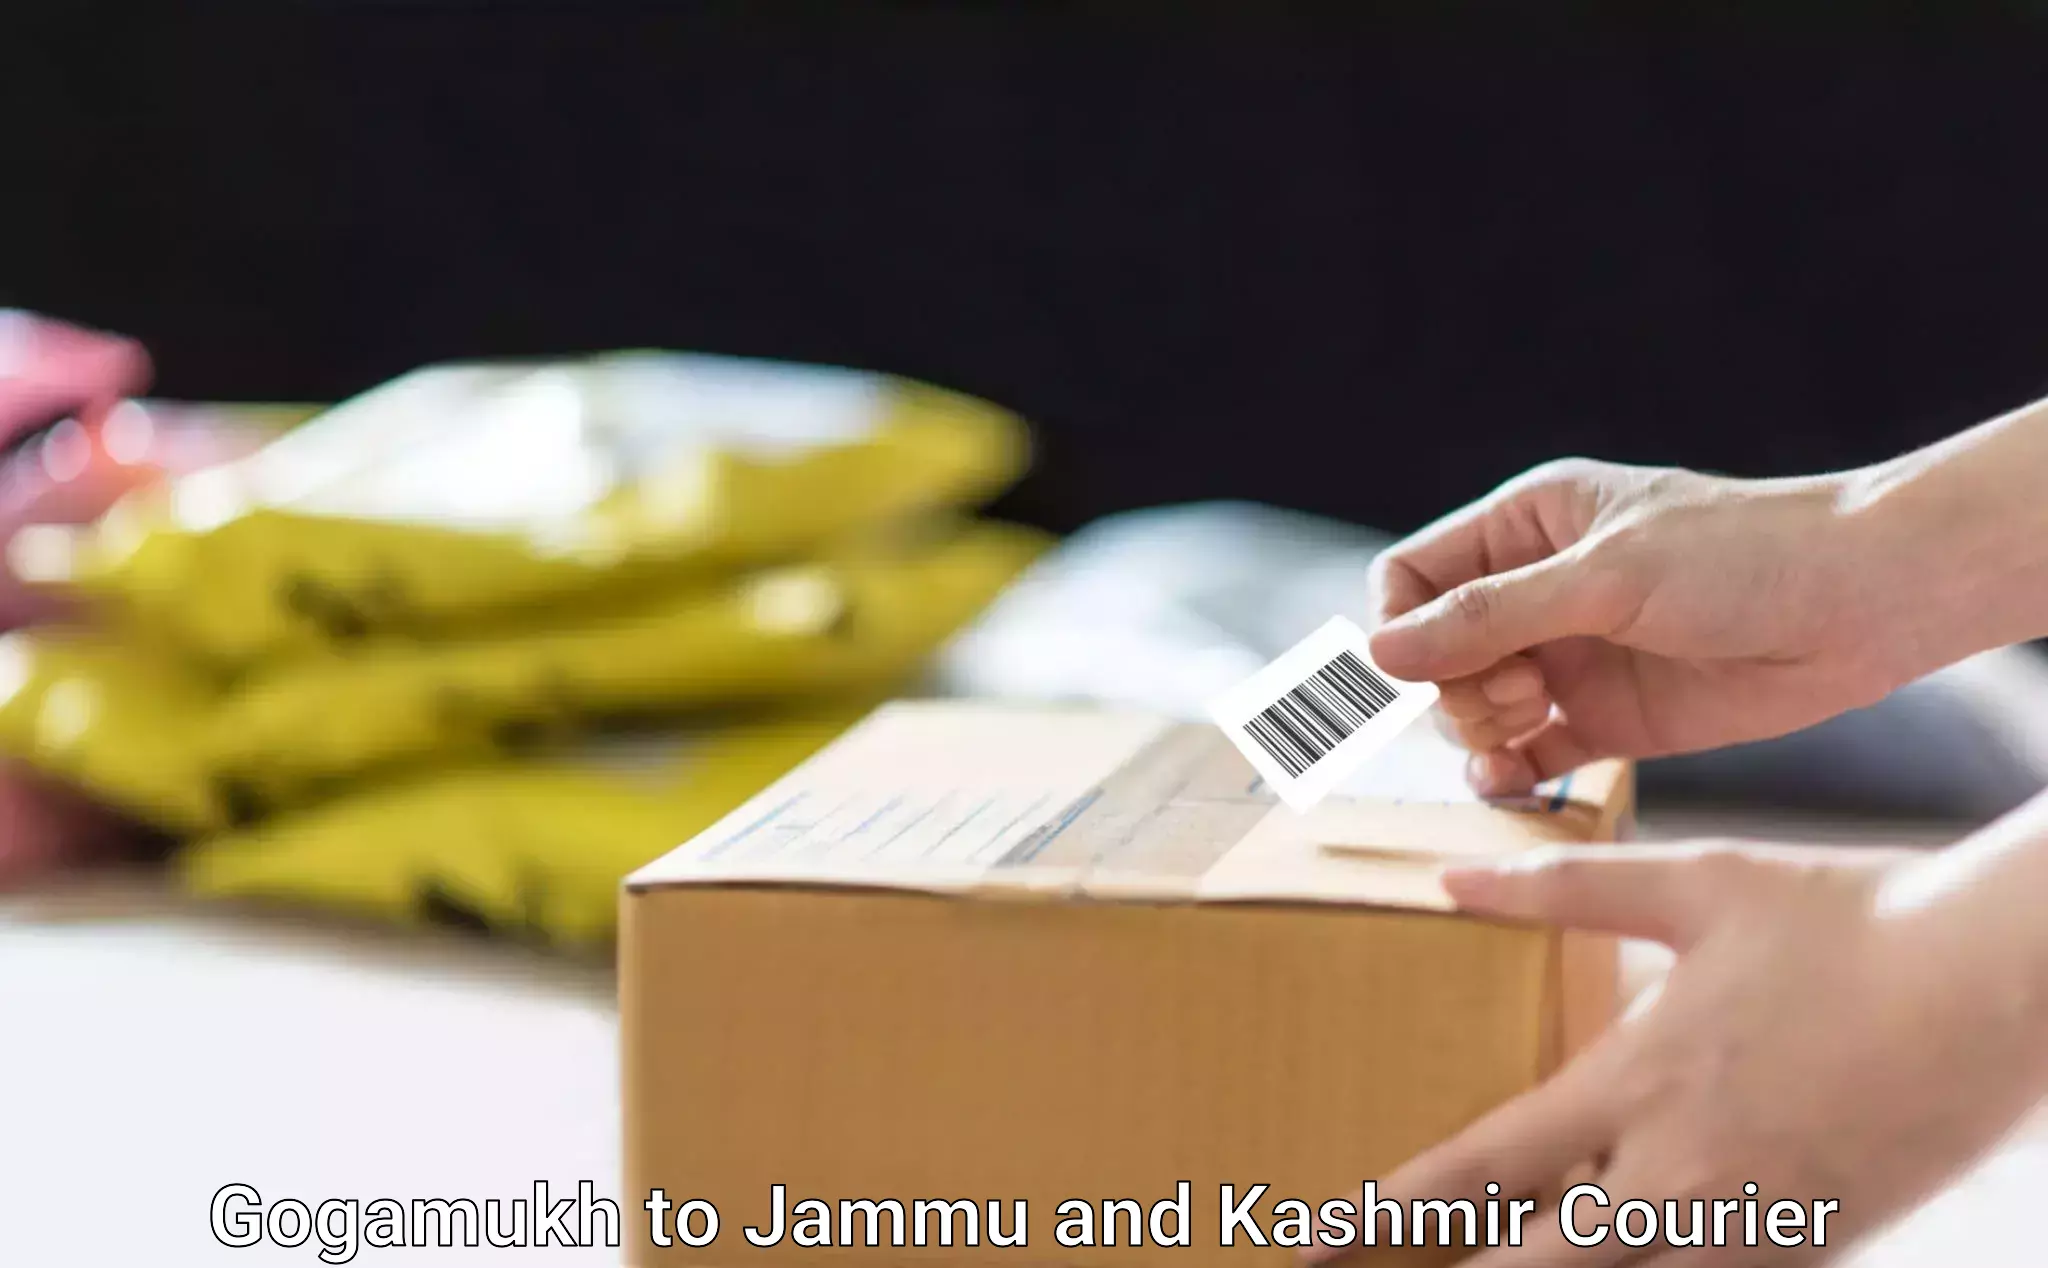 High value parcel delivery in Gogamukh to Bhaderwah